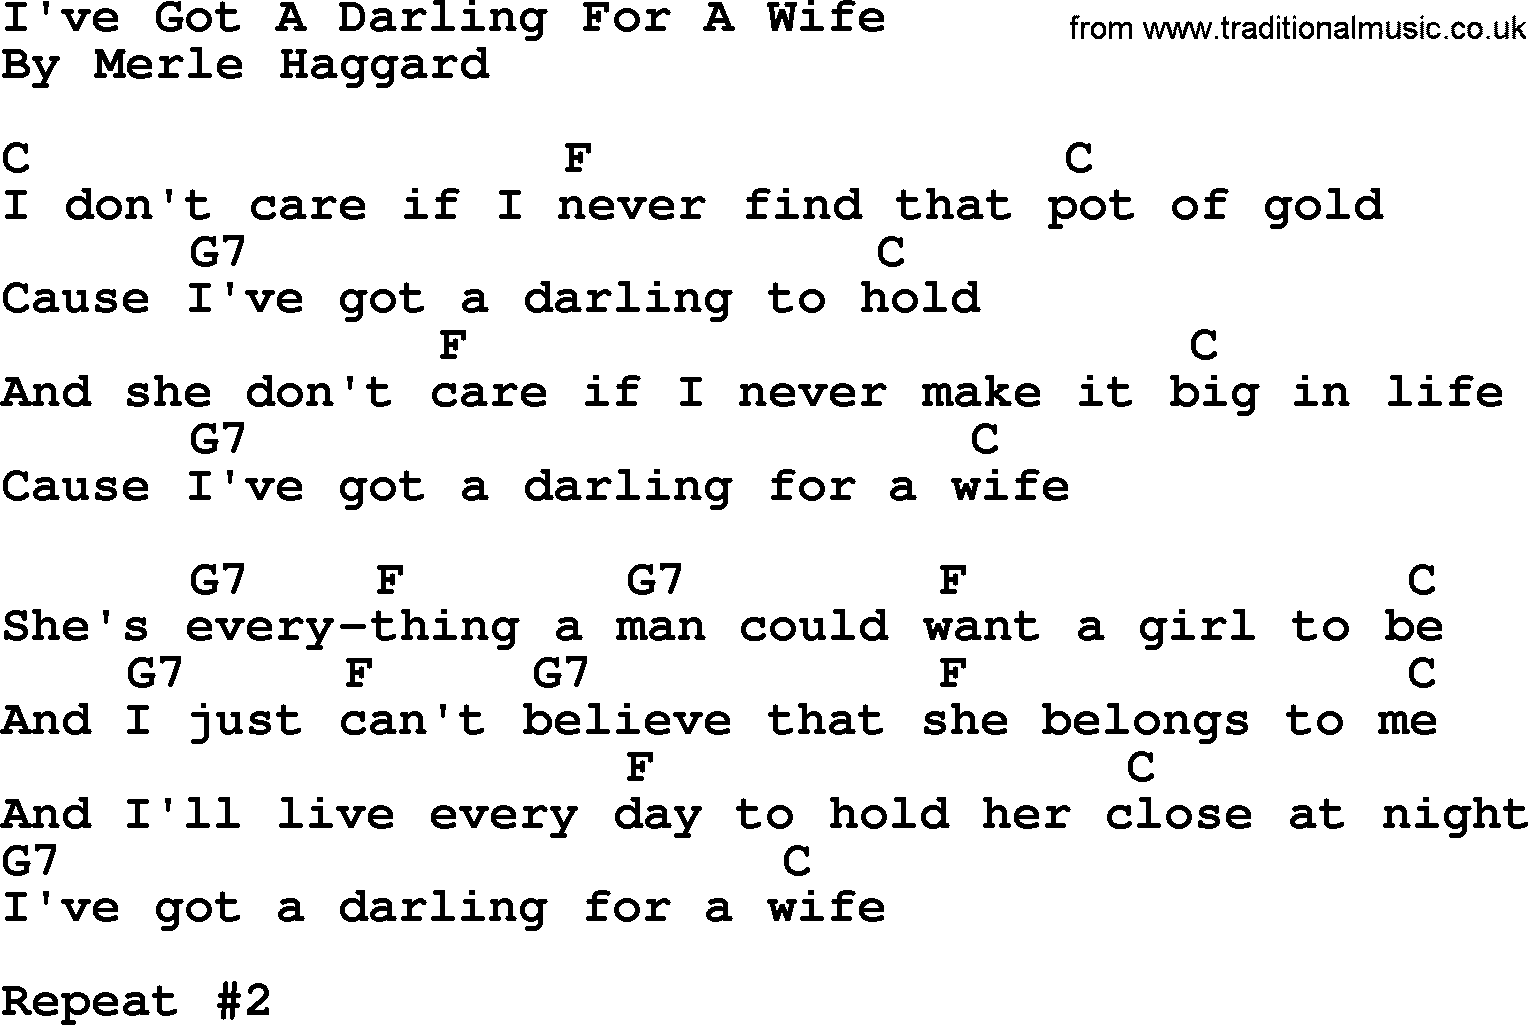 Merle Haggard song: I've Got A Darling For A Wife, lyrics and chords